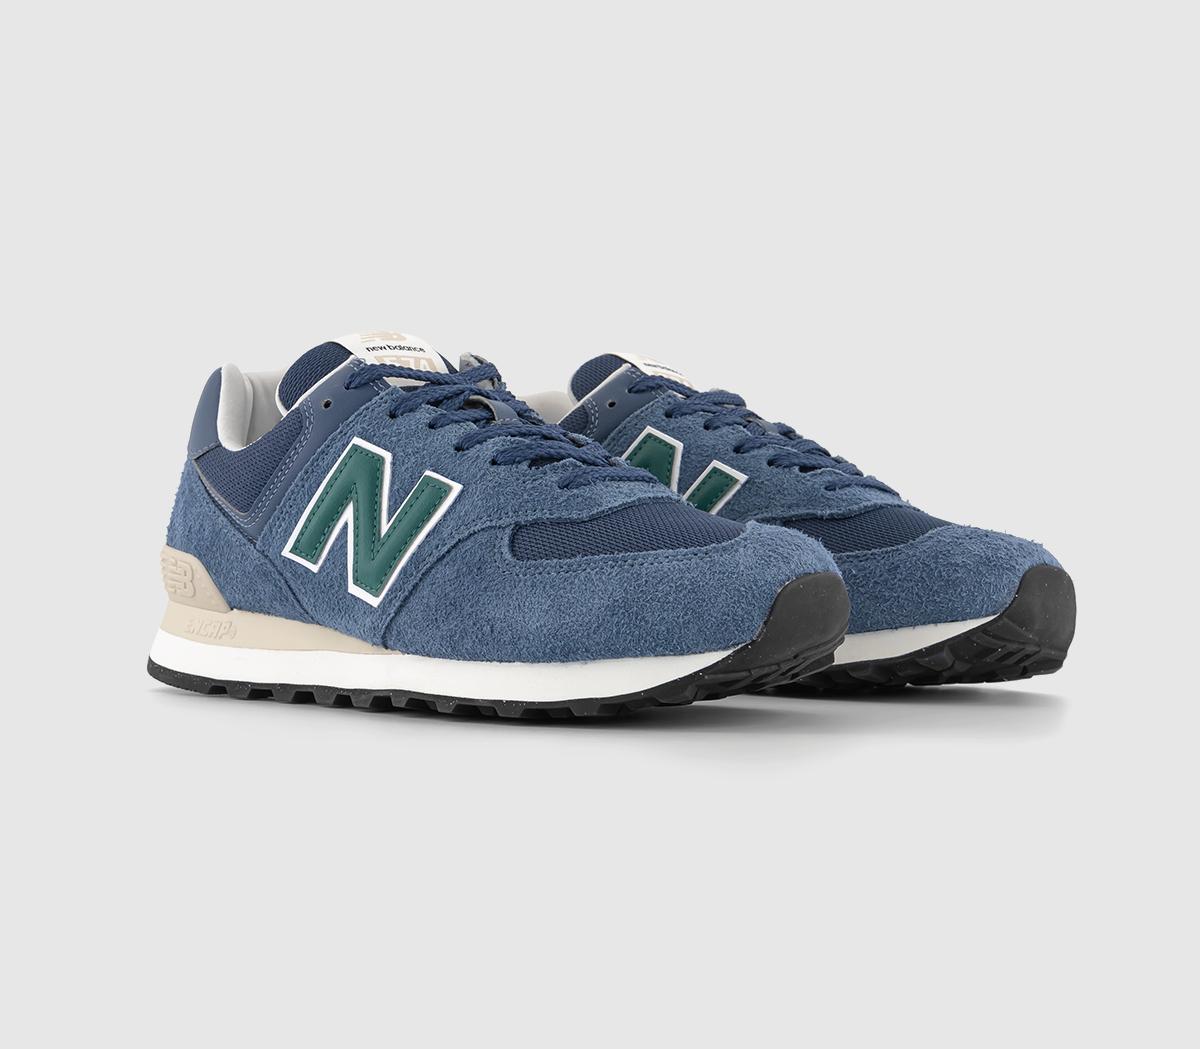 New Balance 574 Trainers Blue Navy Green, 11